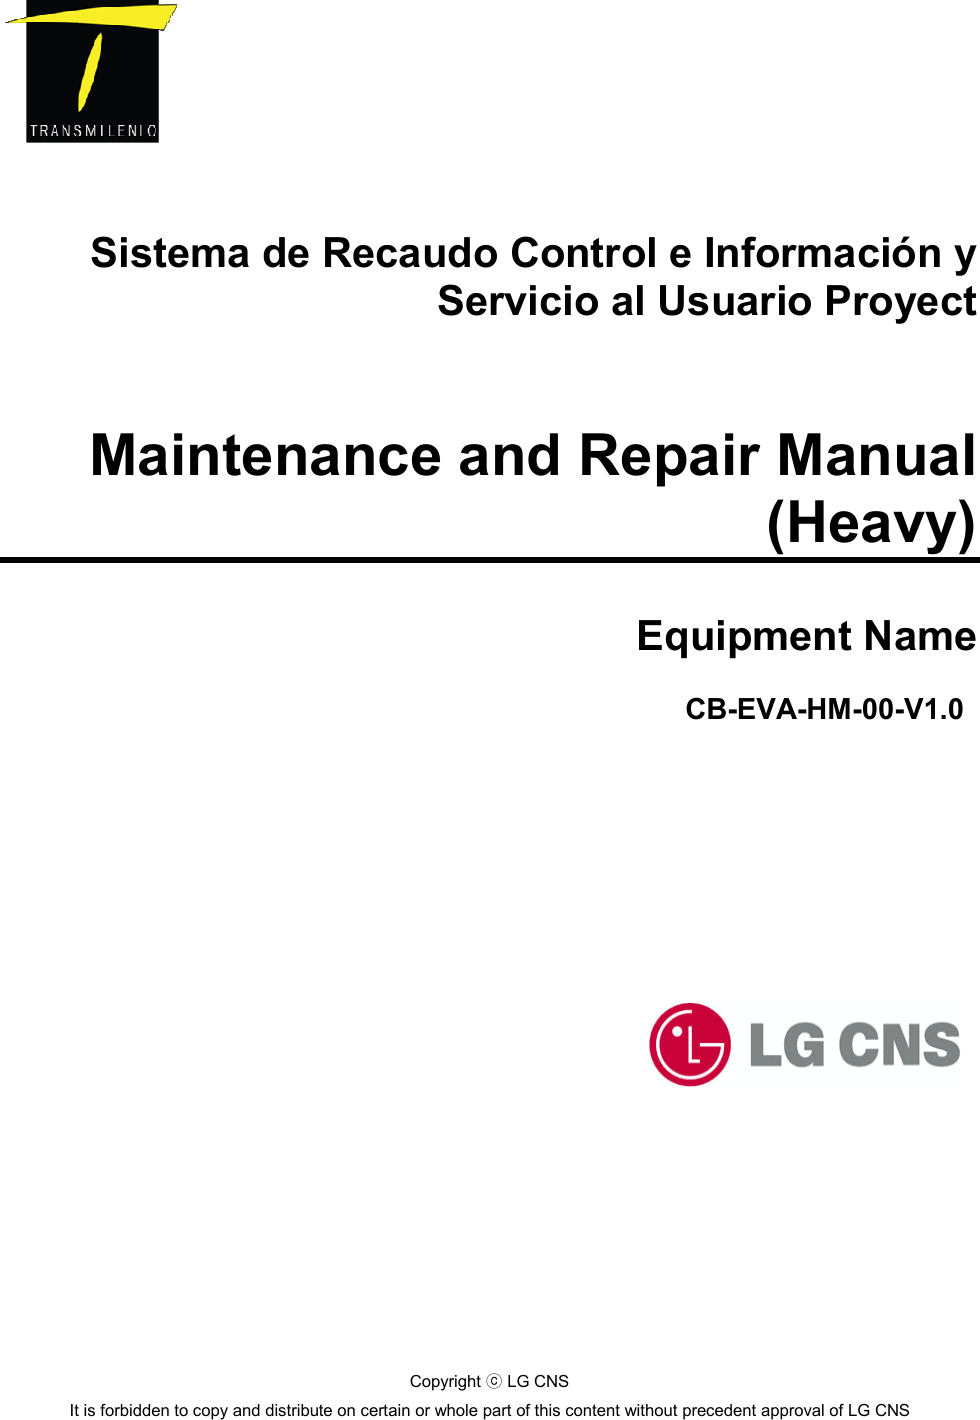       Sistema de Recaudo Control e Información y Servicio al Usuario Proyect   Maintenance and Repair Manual (Heavy)  Equipment Name             CB-EVA-HM-00-V1.0   Copyright   LG CNSⓒ It is forbidden to copy and distribute on certain or whole part of this content without precedent approval of LG CNS  